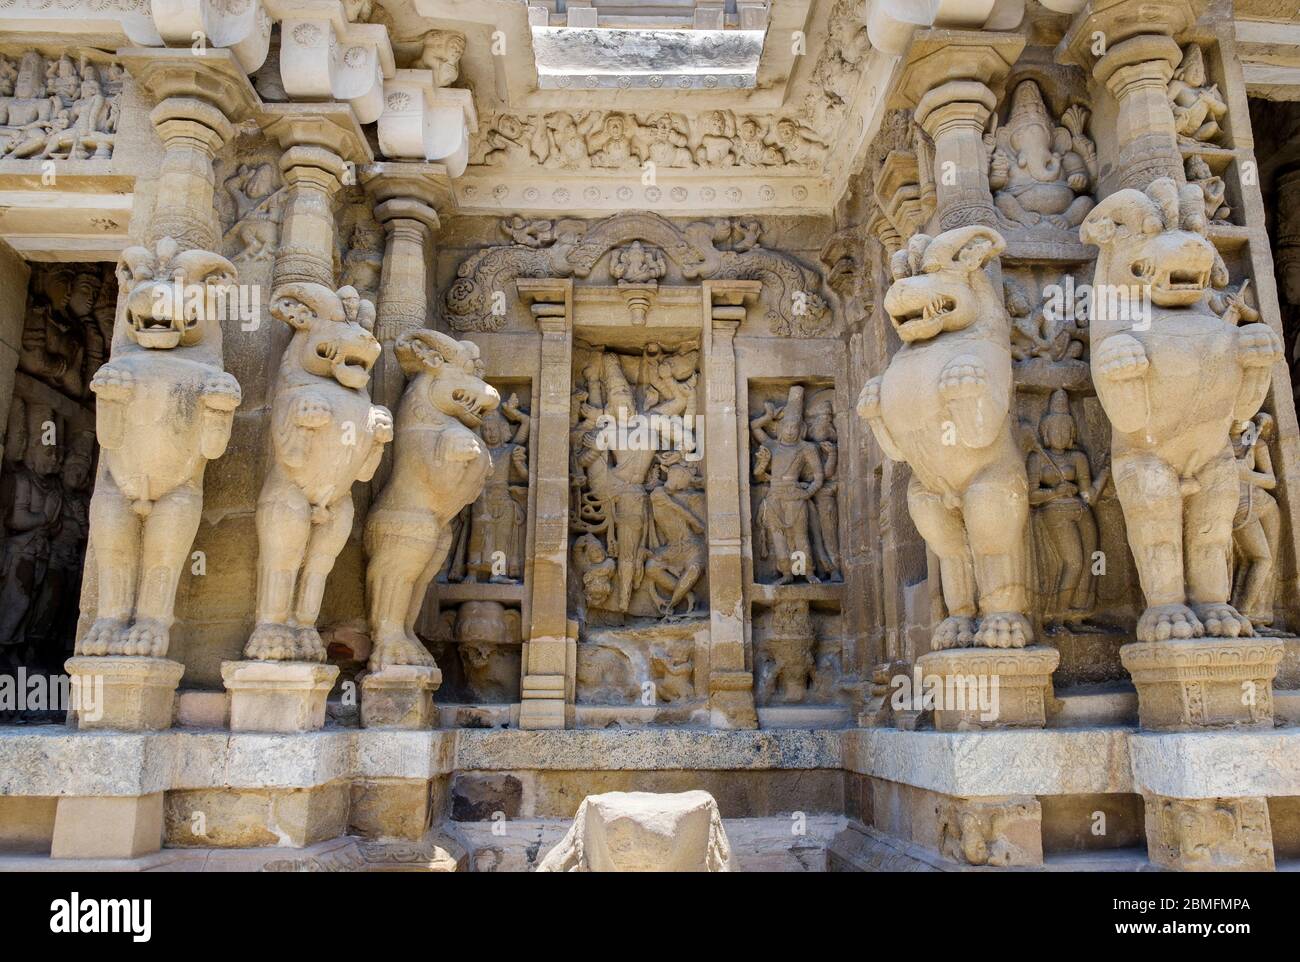 Stone-carved deities framed by sculpted pillars in the shape of lions, Kailasanathar Temple, Kanchipuram, Tamil Nadu, India. Stock Photo